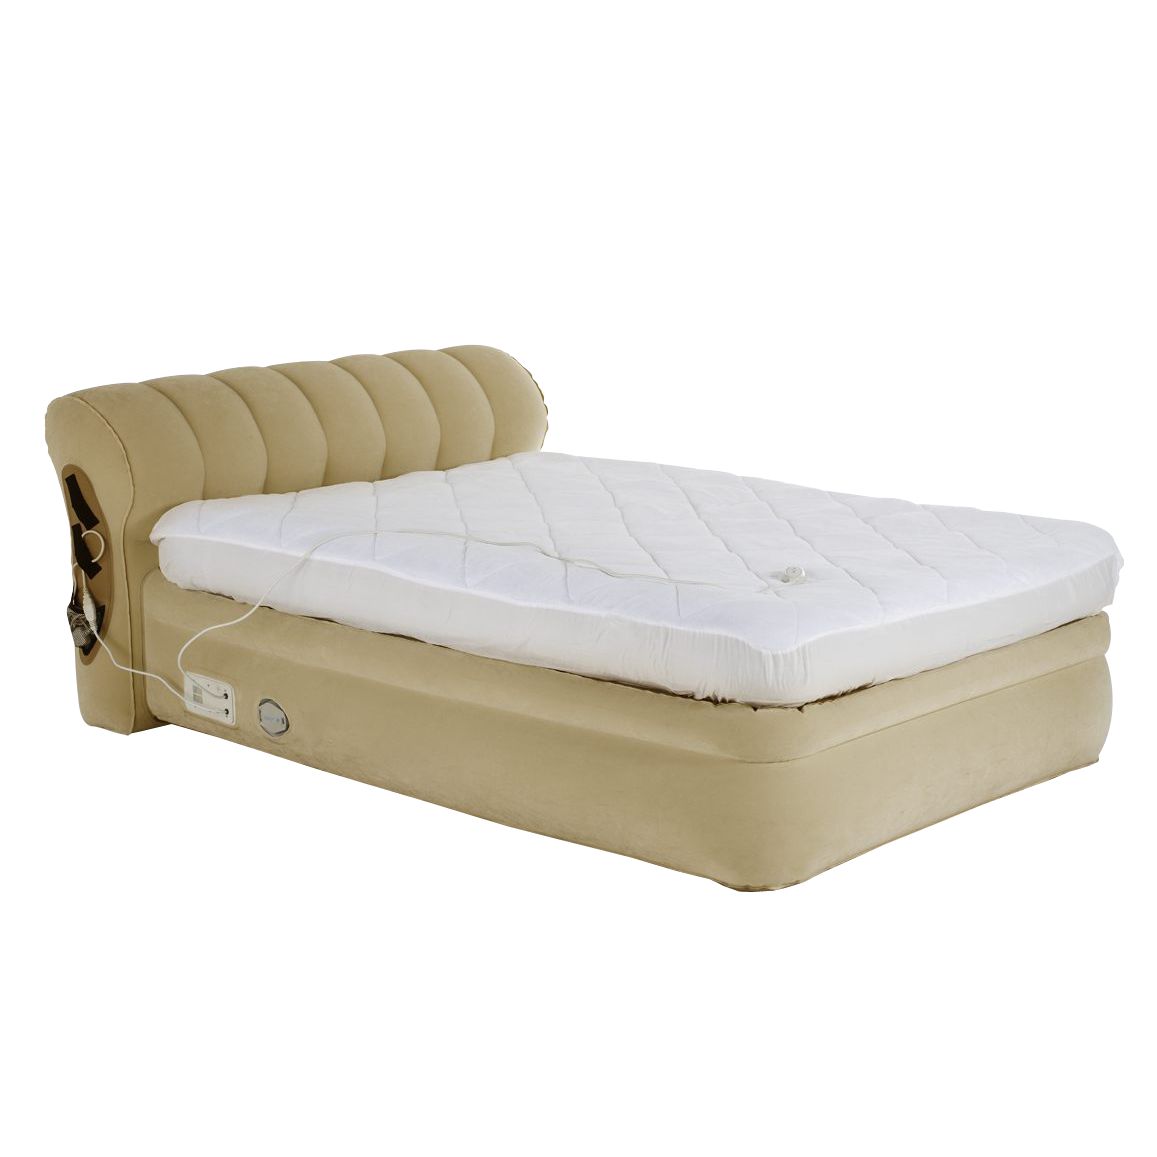 AeroBed Platinum Raised Inflatable Guest Beds